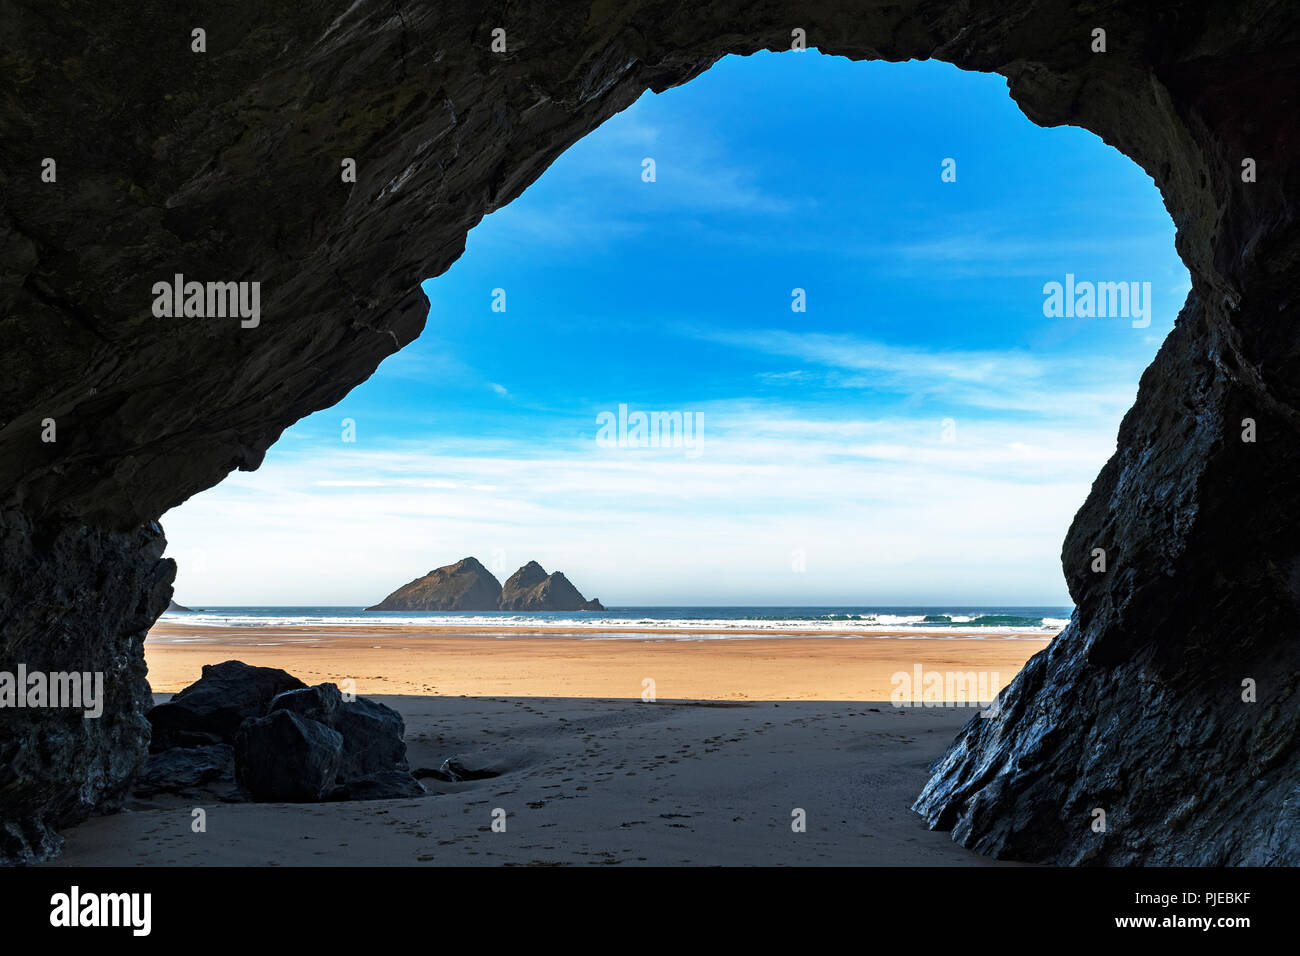 Carters Rocks Aka Gull Rocks Photo Taken From Inside A Cliff Cave On The Beach At Holywell Bay, Cornwall, Uk. Stock Photo